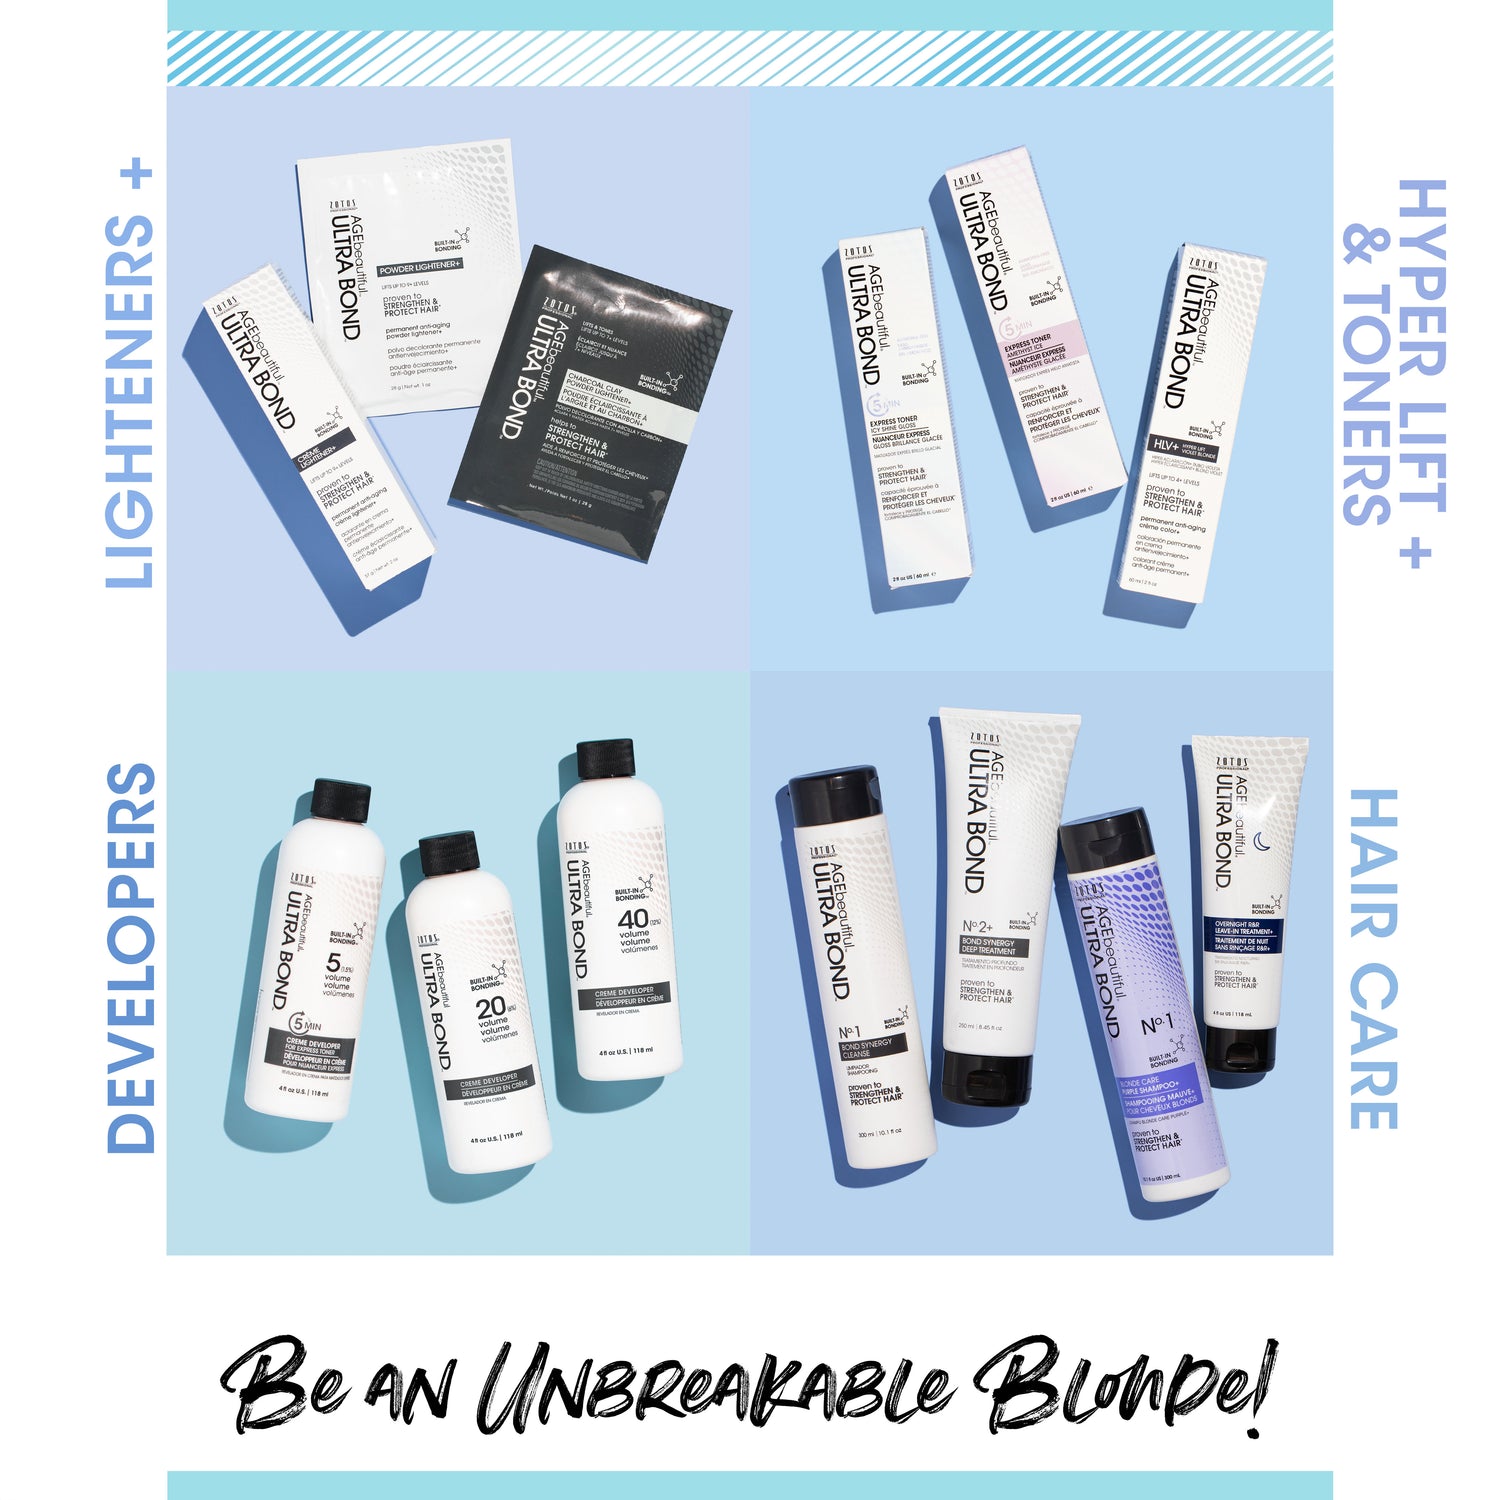 Be an unbreakable blonde!